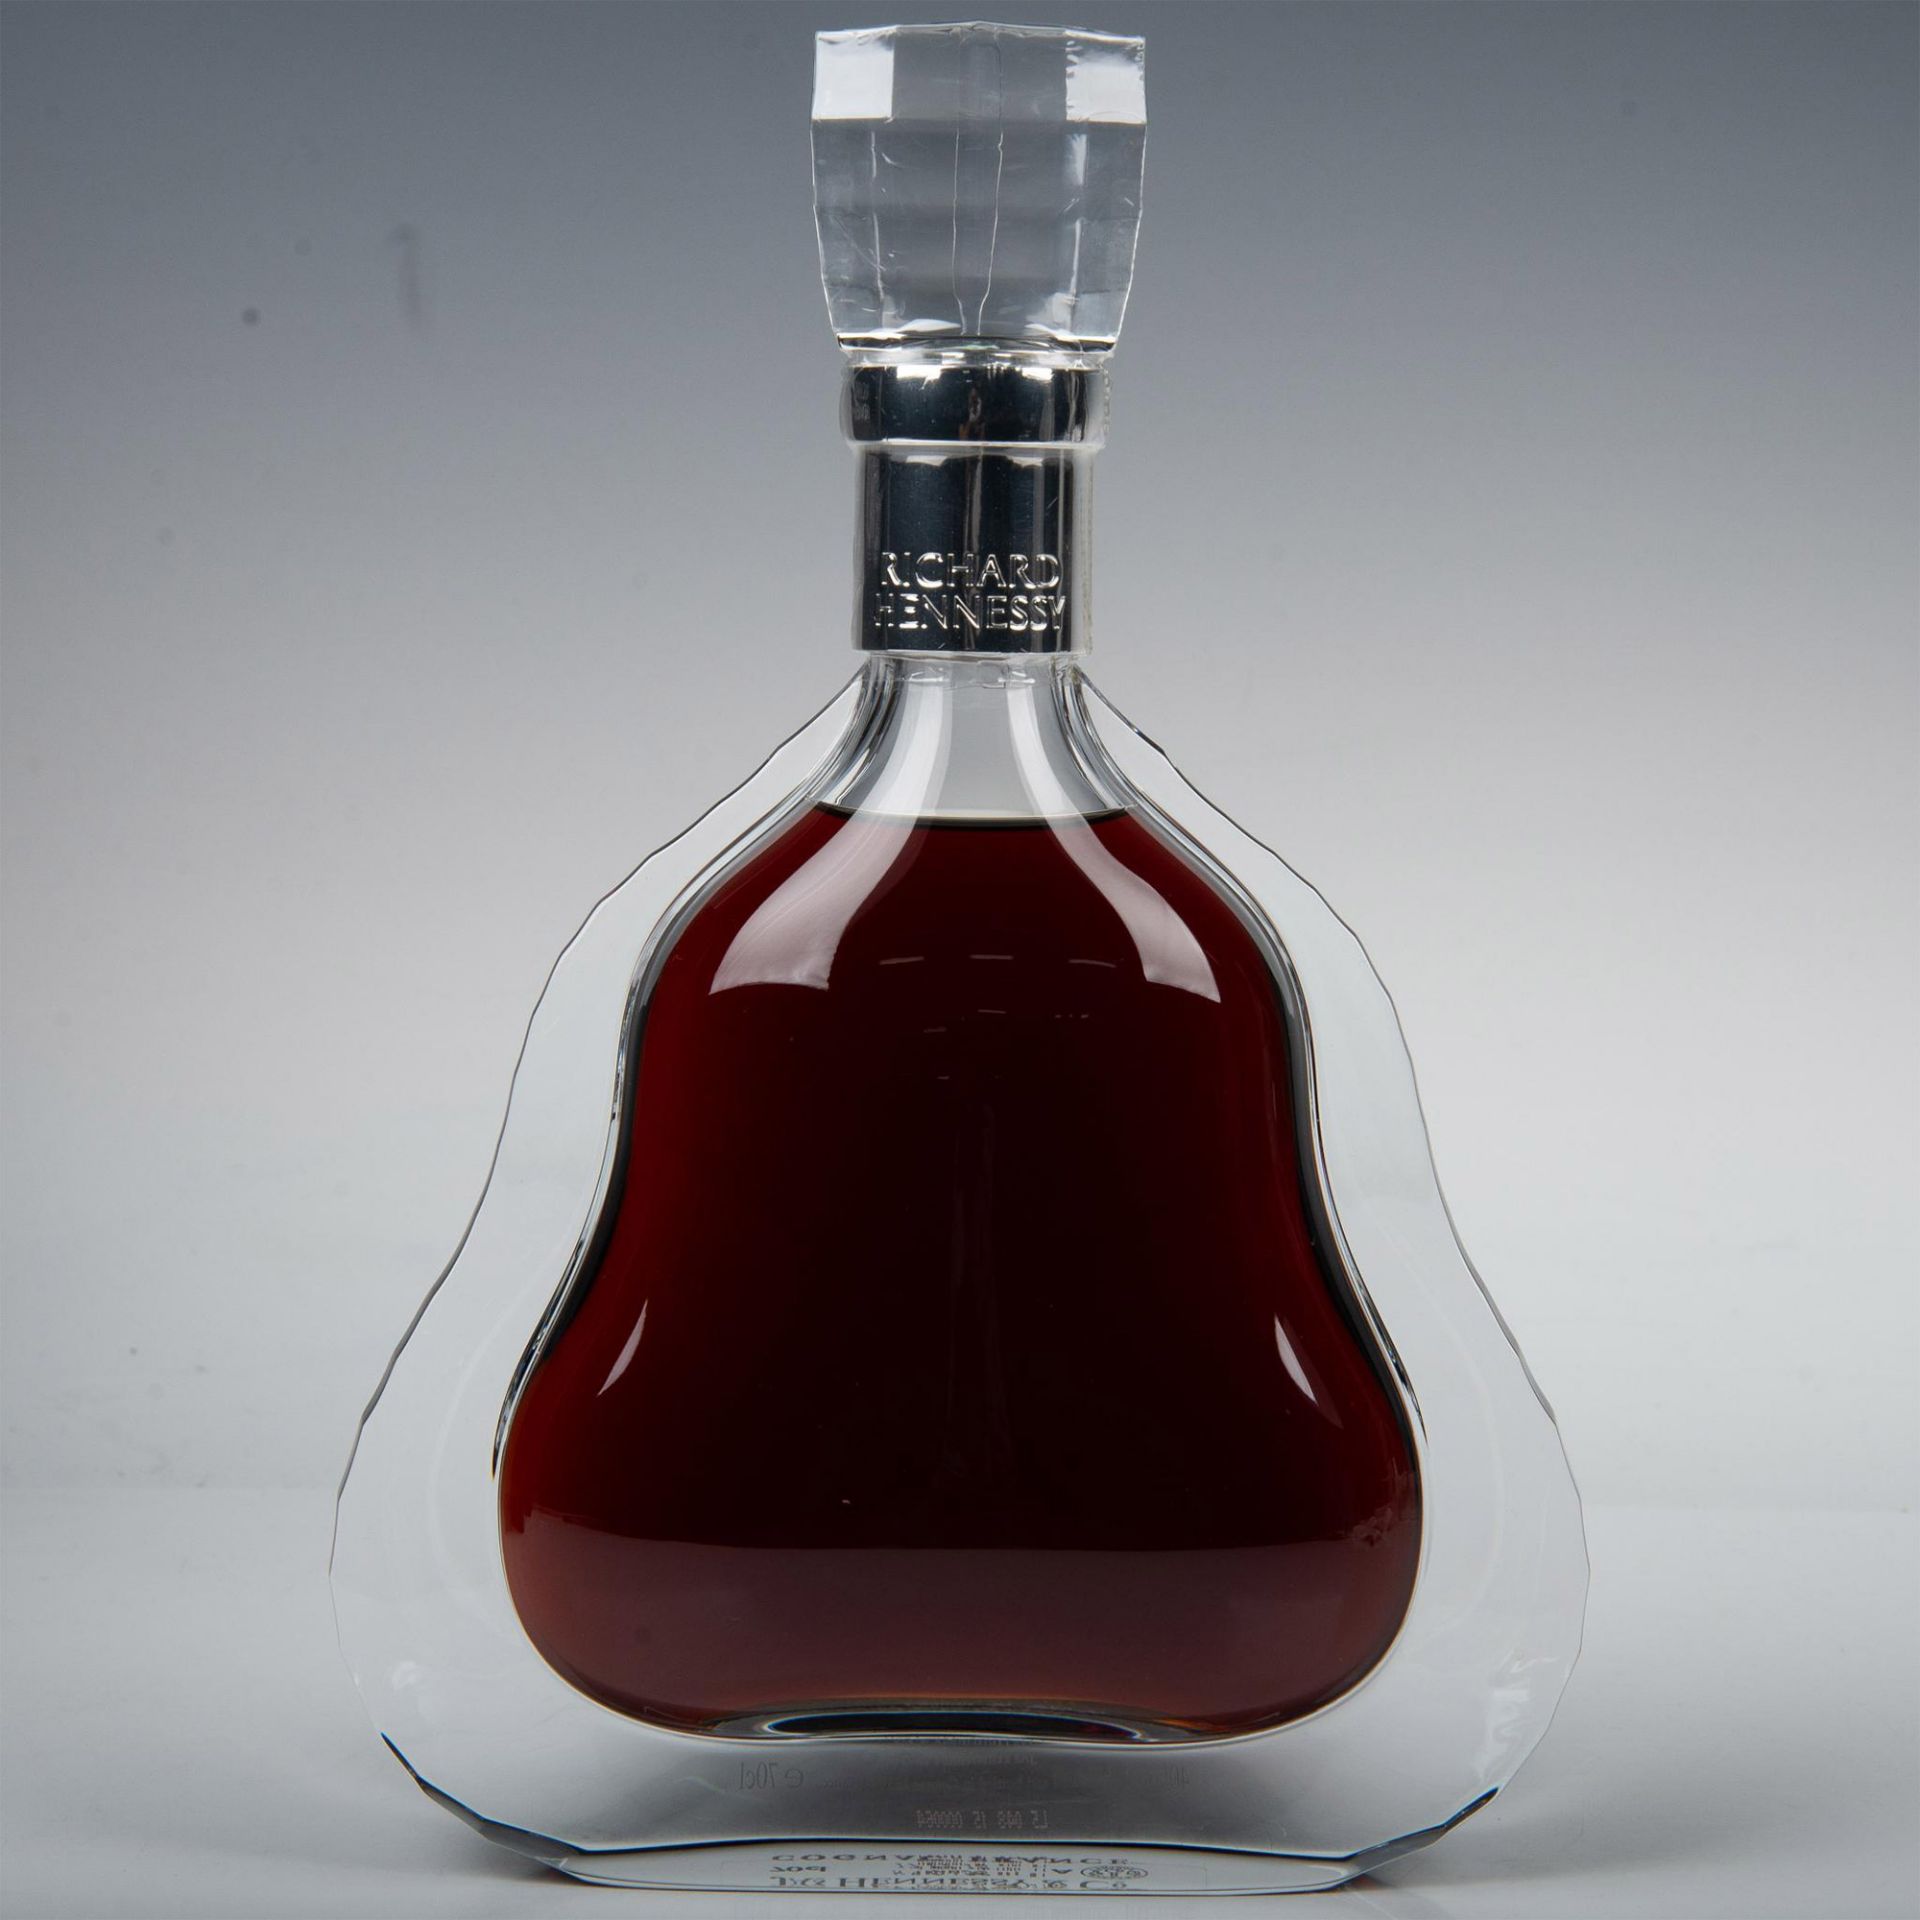 Richard Hennessy & Co. Cognac, Baccarat Crystal - Image 6 of 19